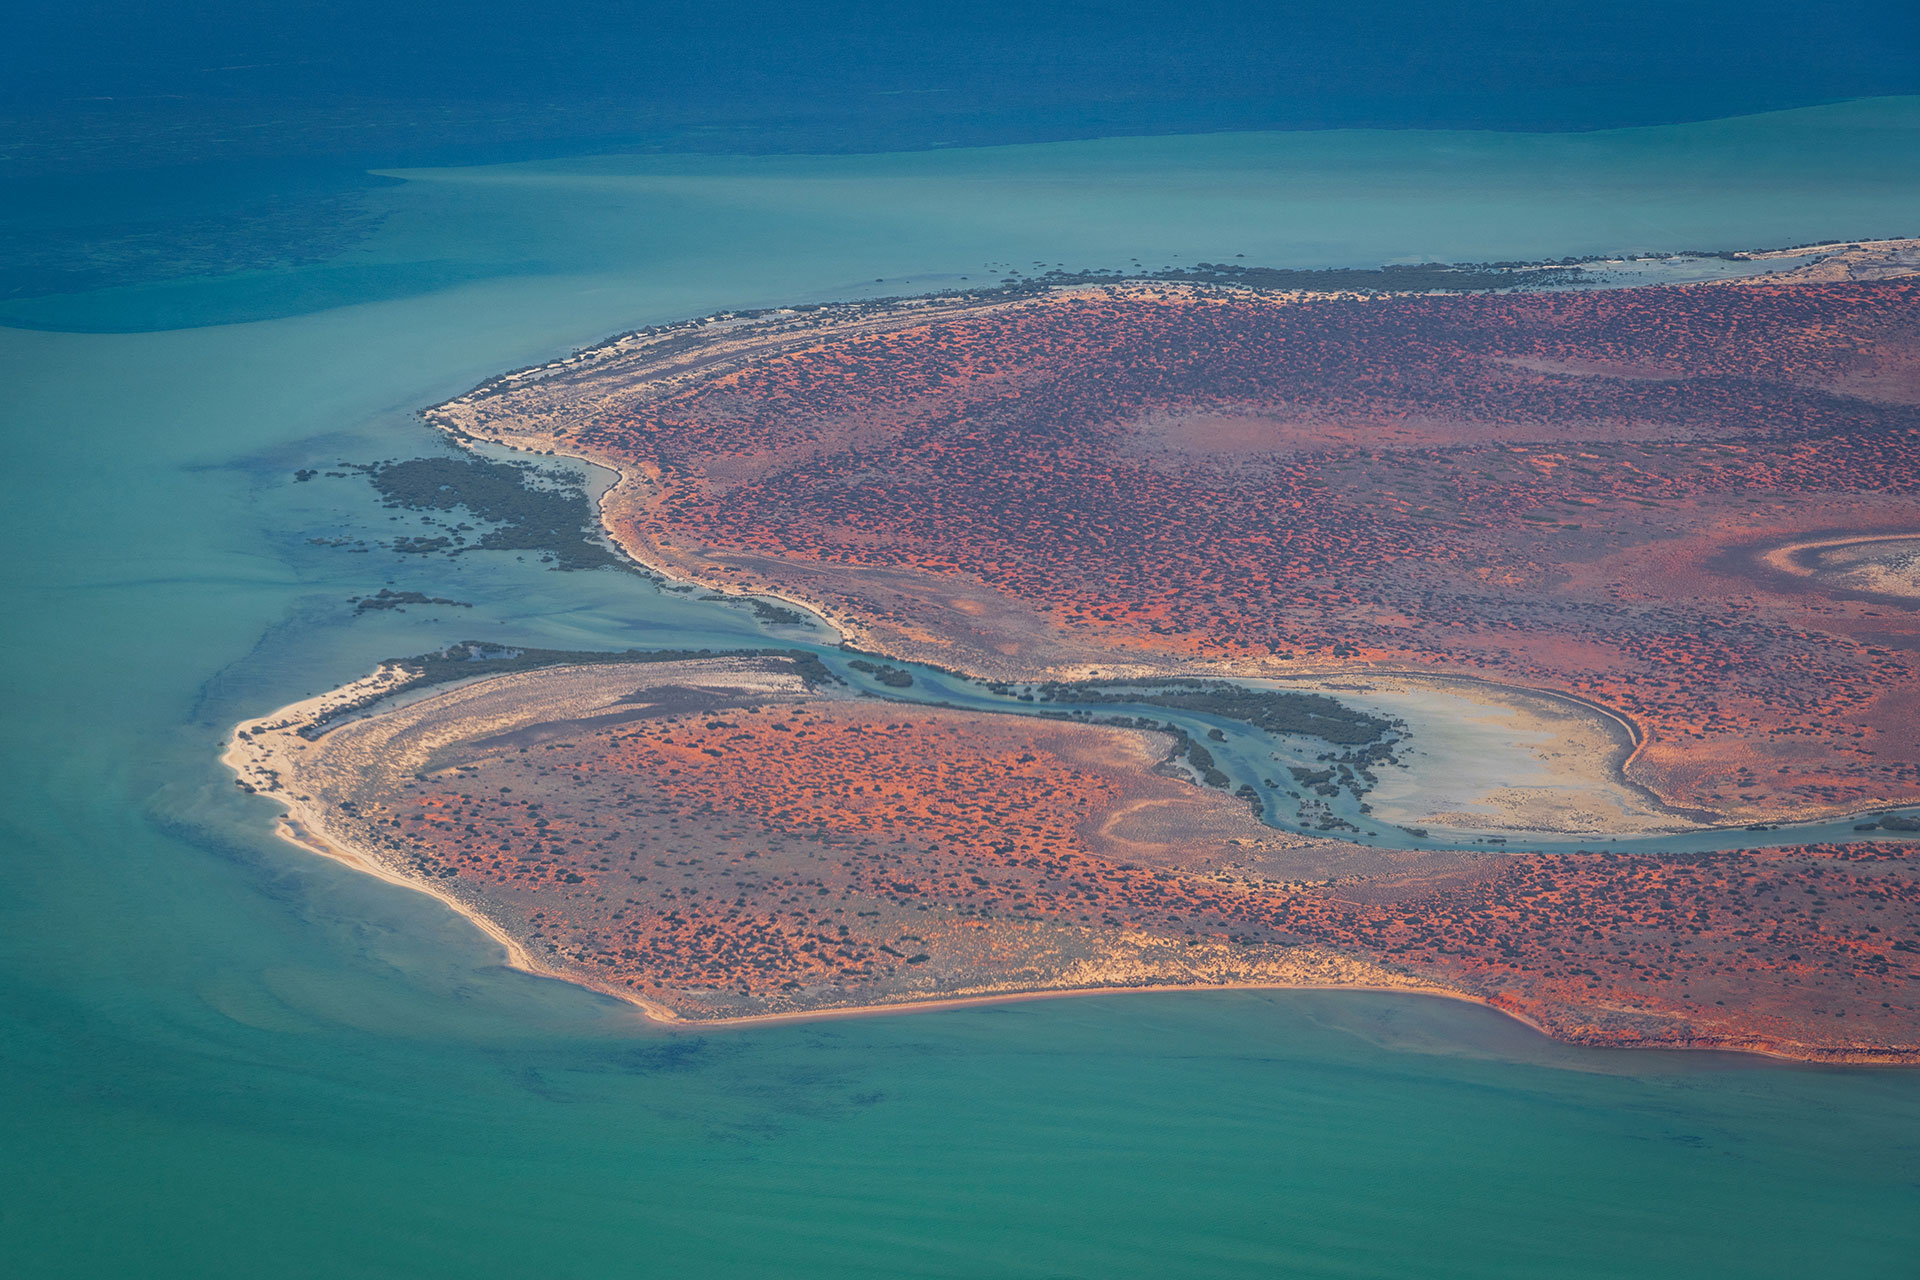 If you choose to fly from Perth to Exmouth you get to witness WA's colourful landscape from the plane